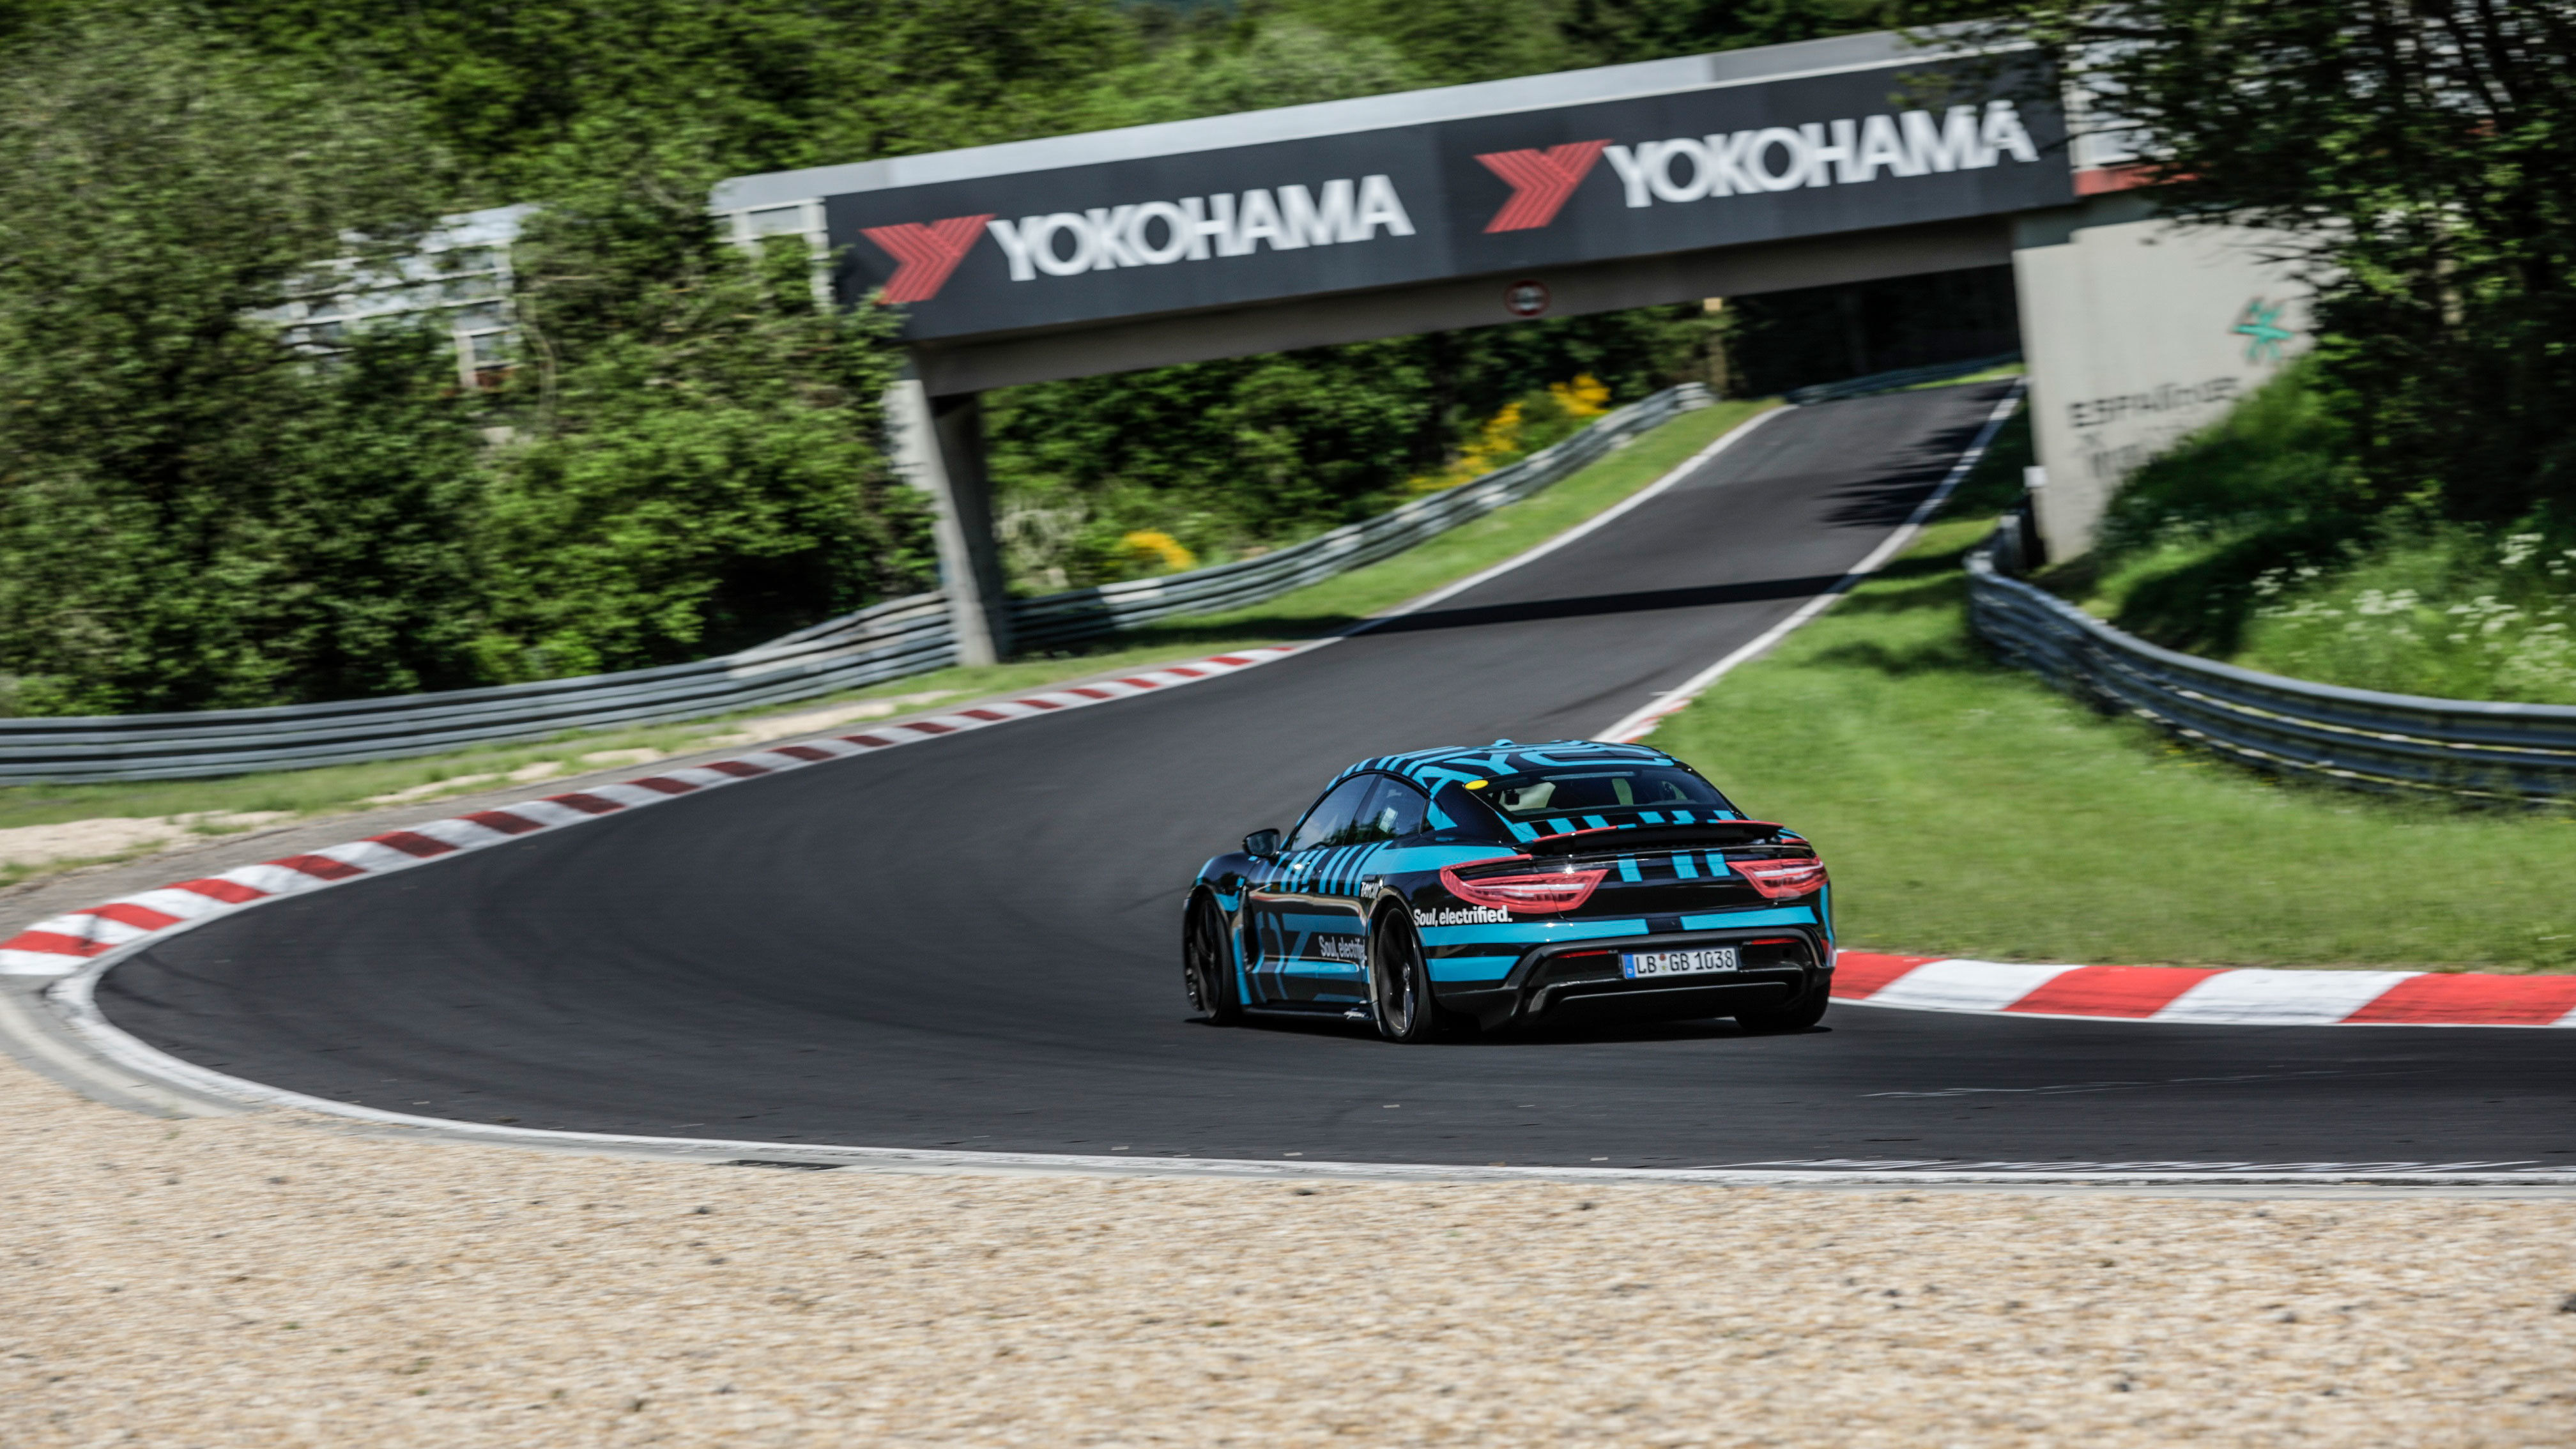 high_taycan_prototype_in_the_aremberg_section_nürburgring_nordschleife_2019_porsche_ag